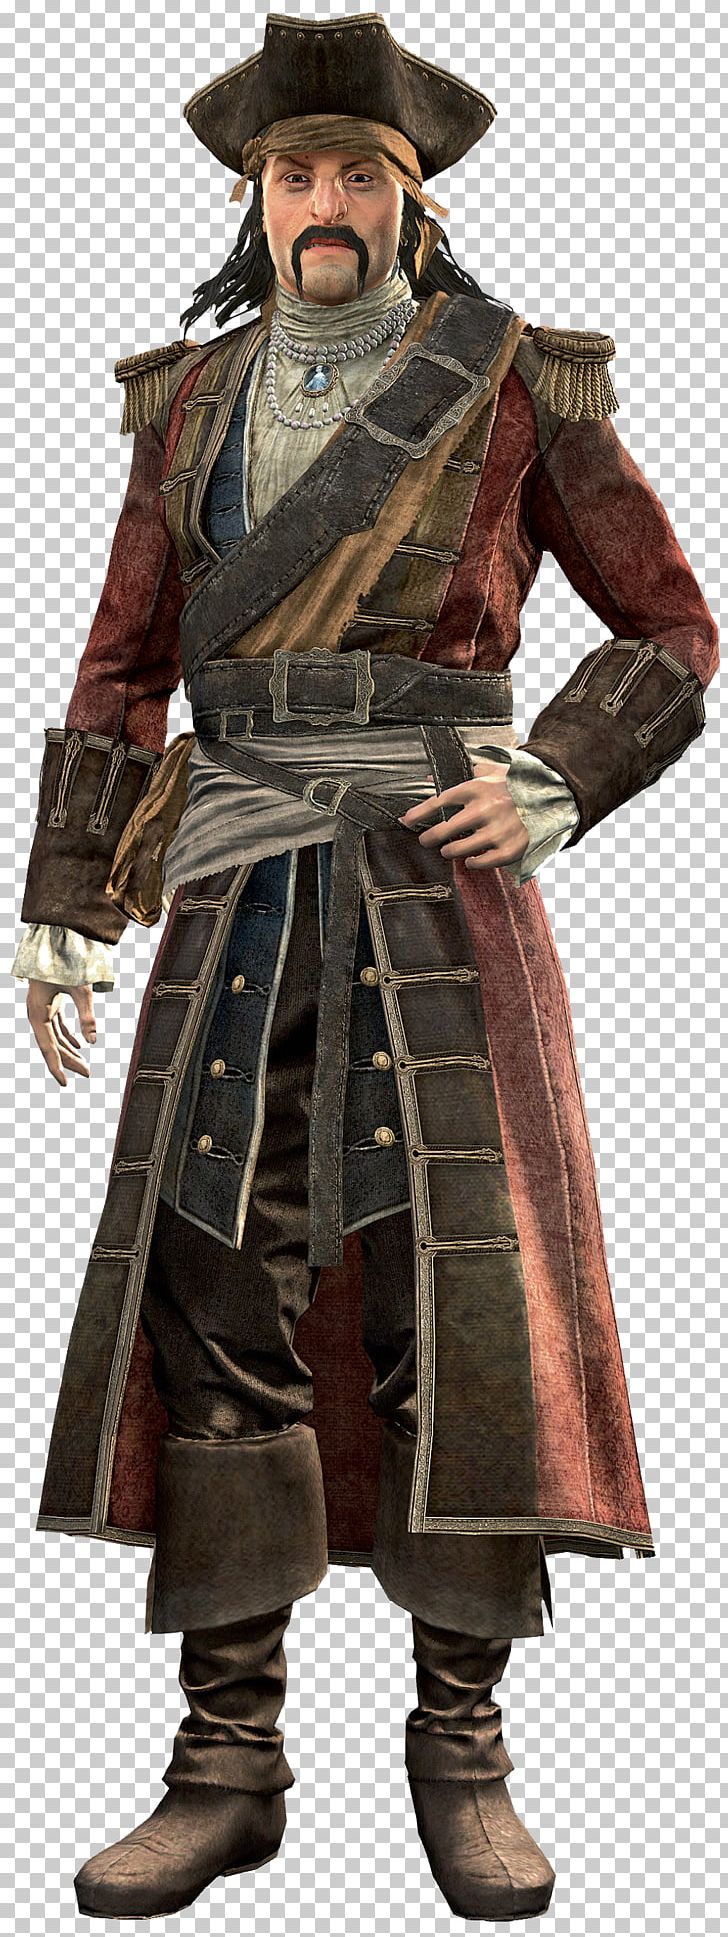 Bartholomew Roberts Assassin's Creed IV: Black Flag Golden Age Of Piracy Wales PNG, Clipart, 18th Century, Adventurer, Anne Bonny, Armour, Assassins Creed Free PNG Download